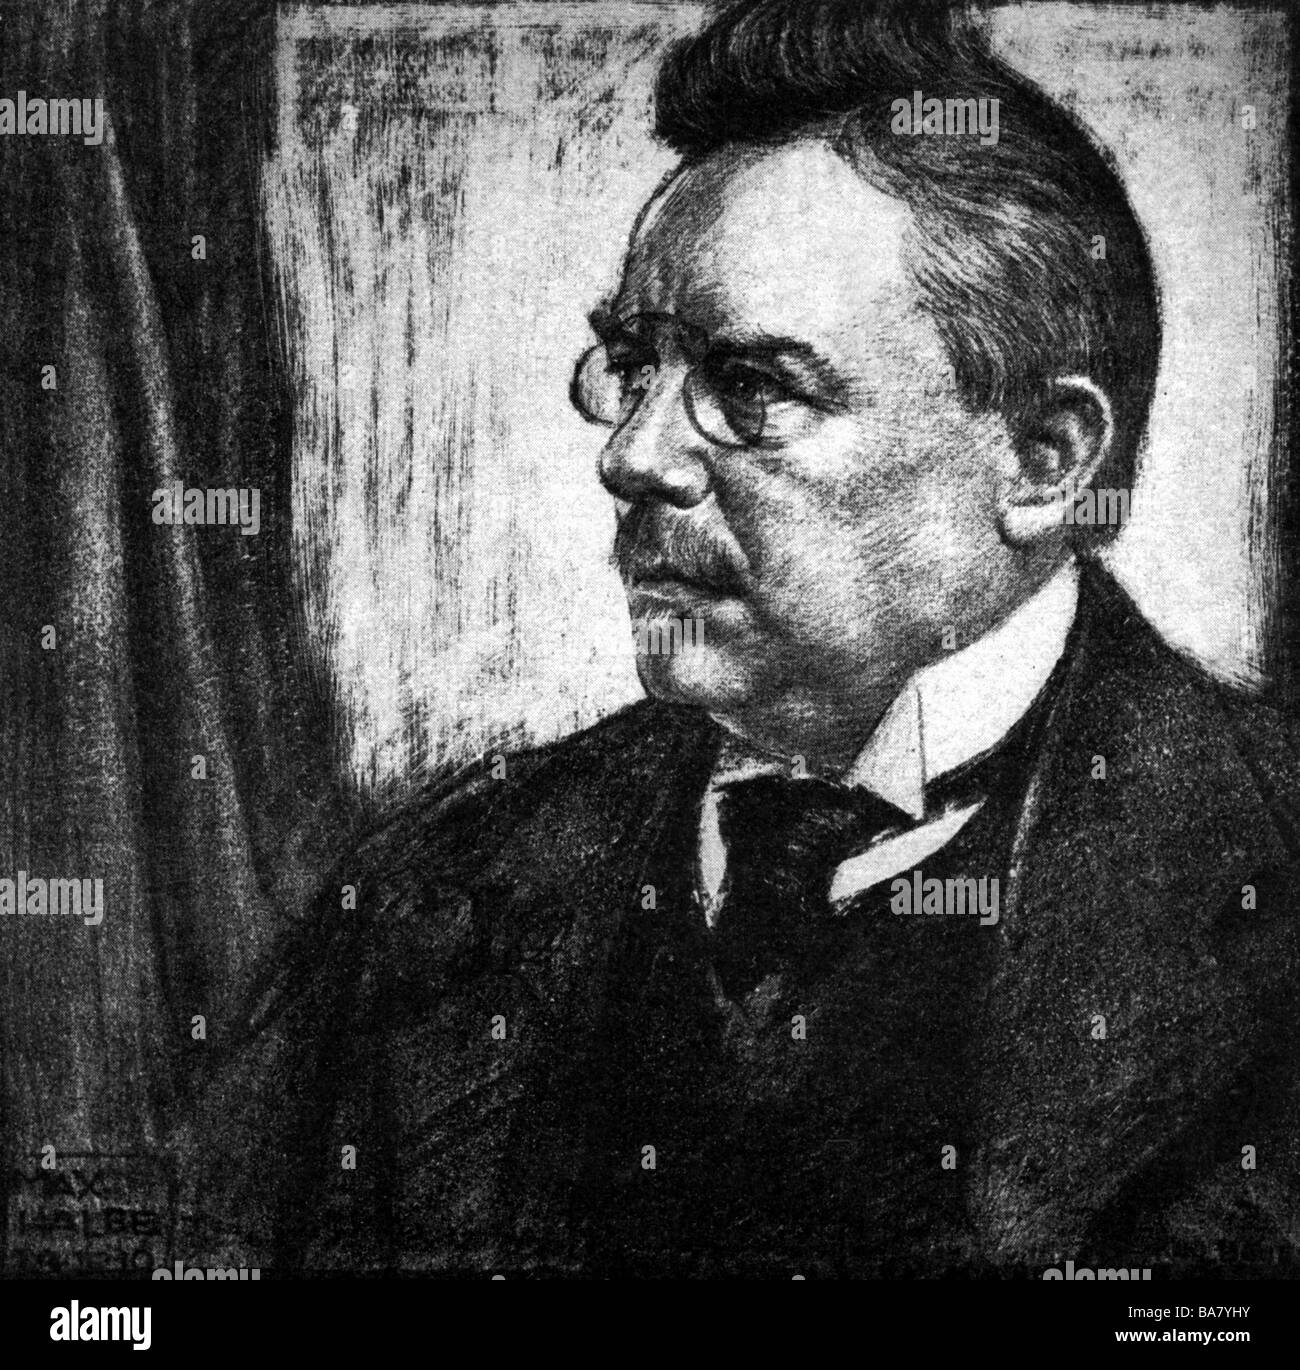 Halbe, Max, 4.10.1865 - 30.11.1944, German author / writer, portrait, lithograph by Karl Bauer, Stock Photo